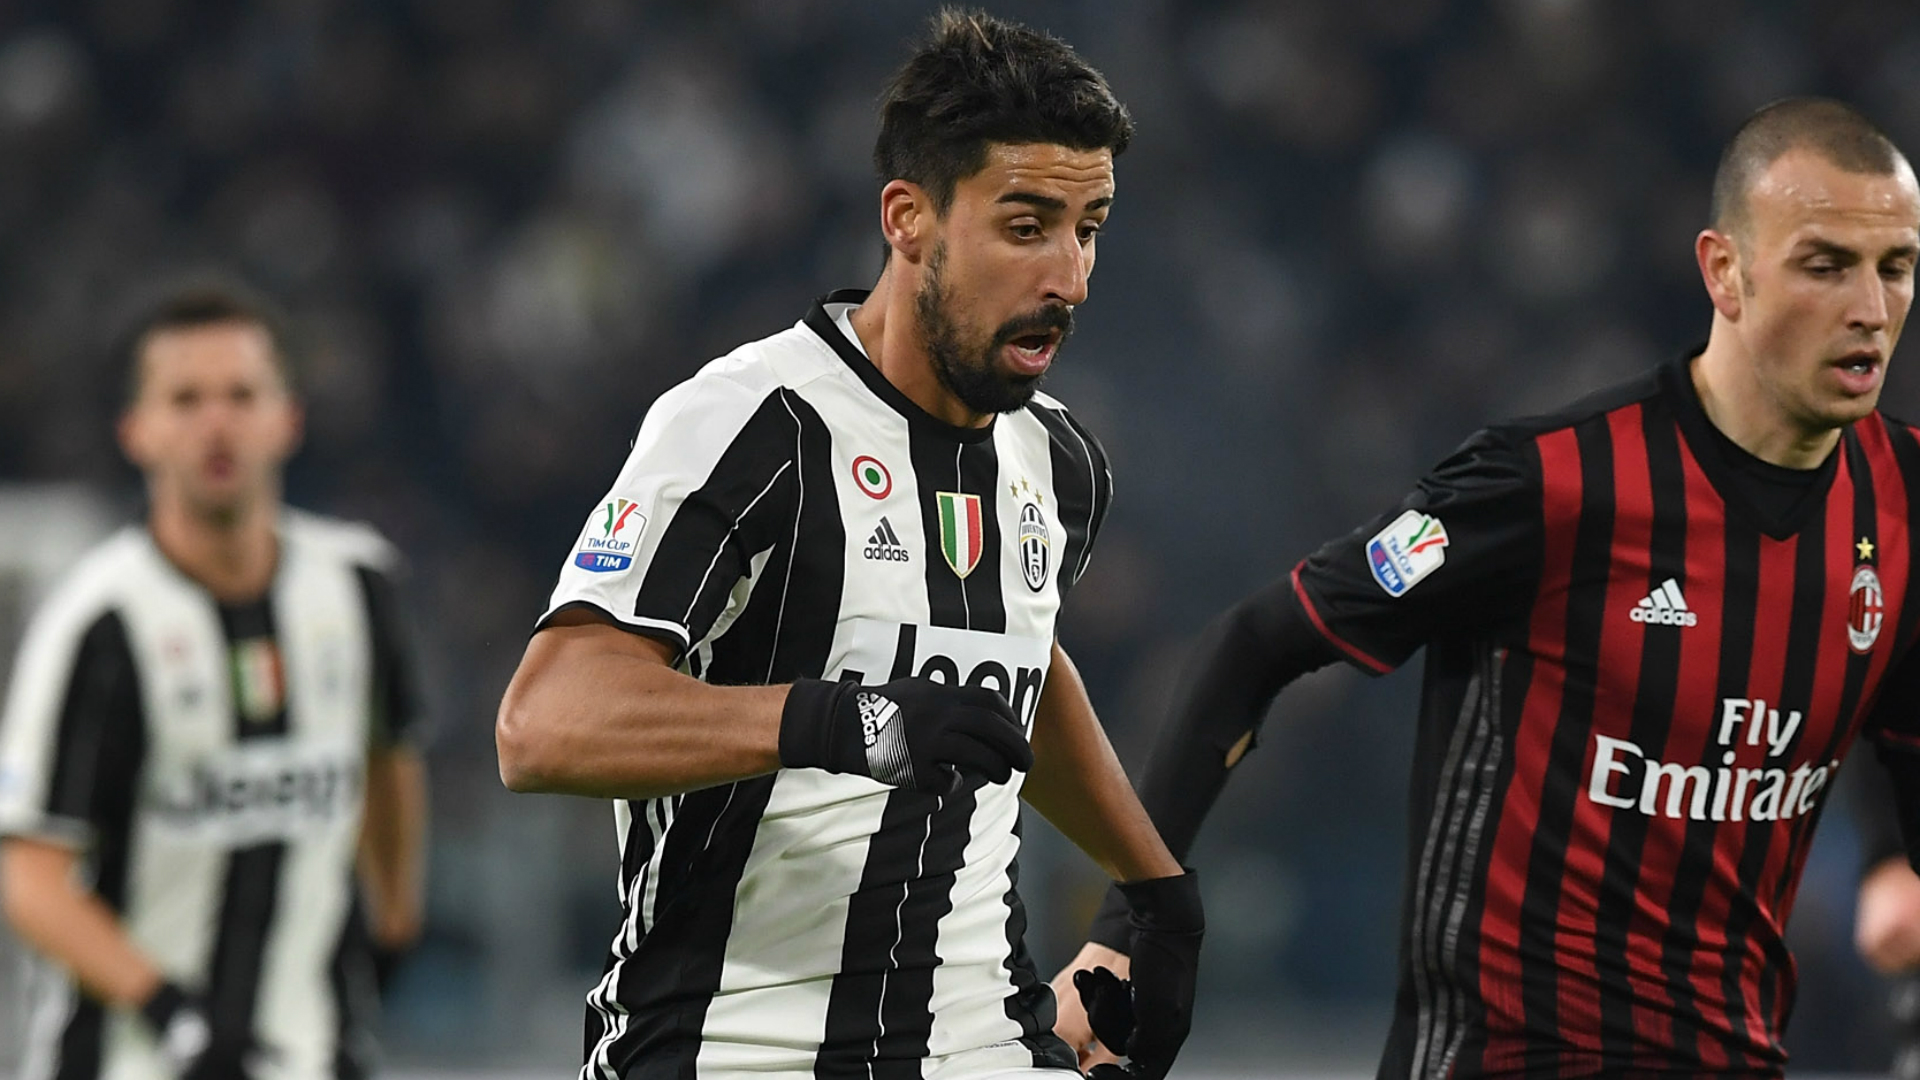 Sami Khedira's ability to "read the crucial moments" made the difference in Juventus' defeat of AC Milan, according to Massimiliano Allegri.